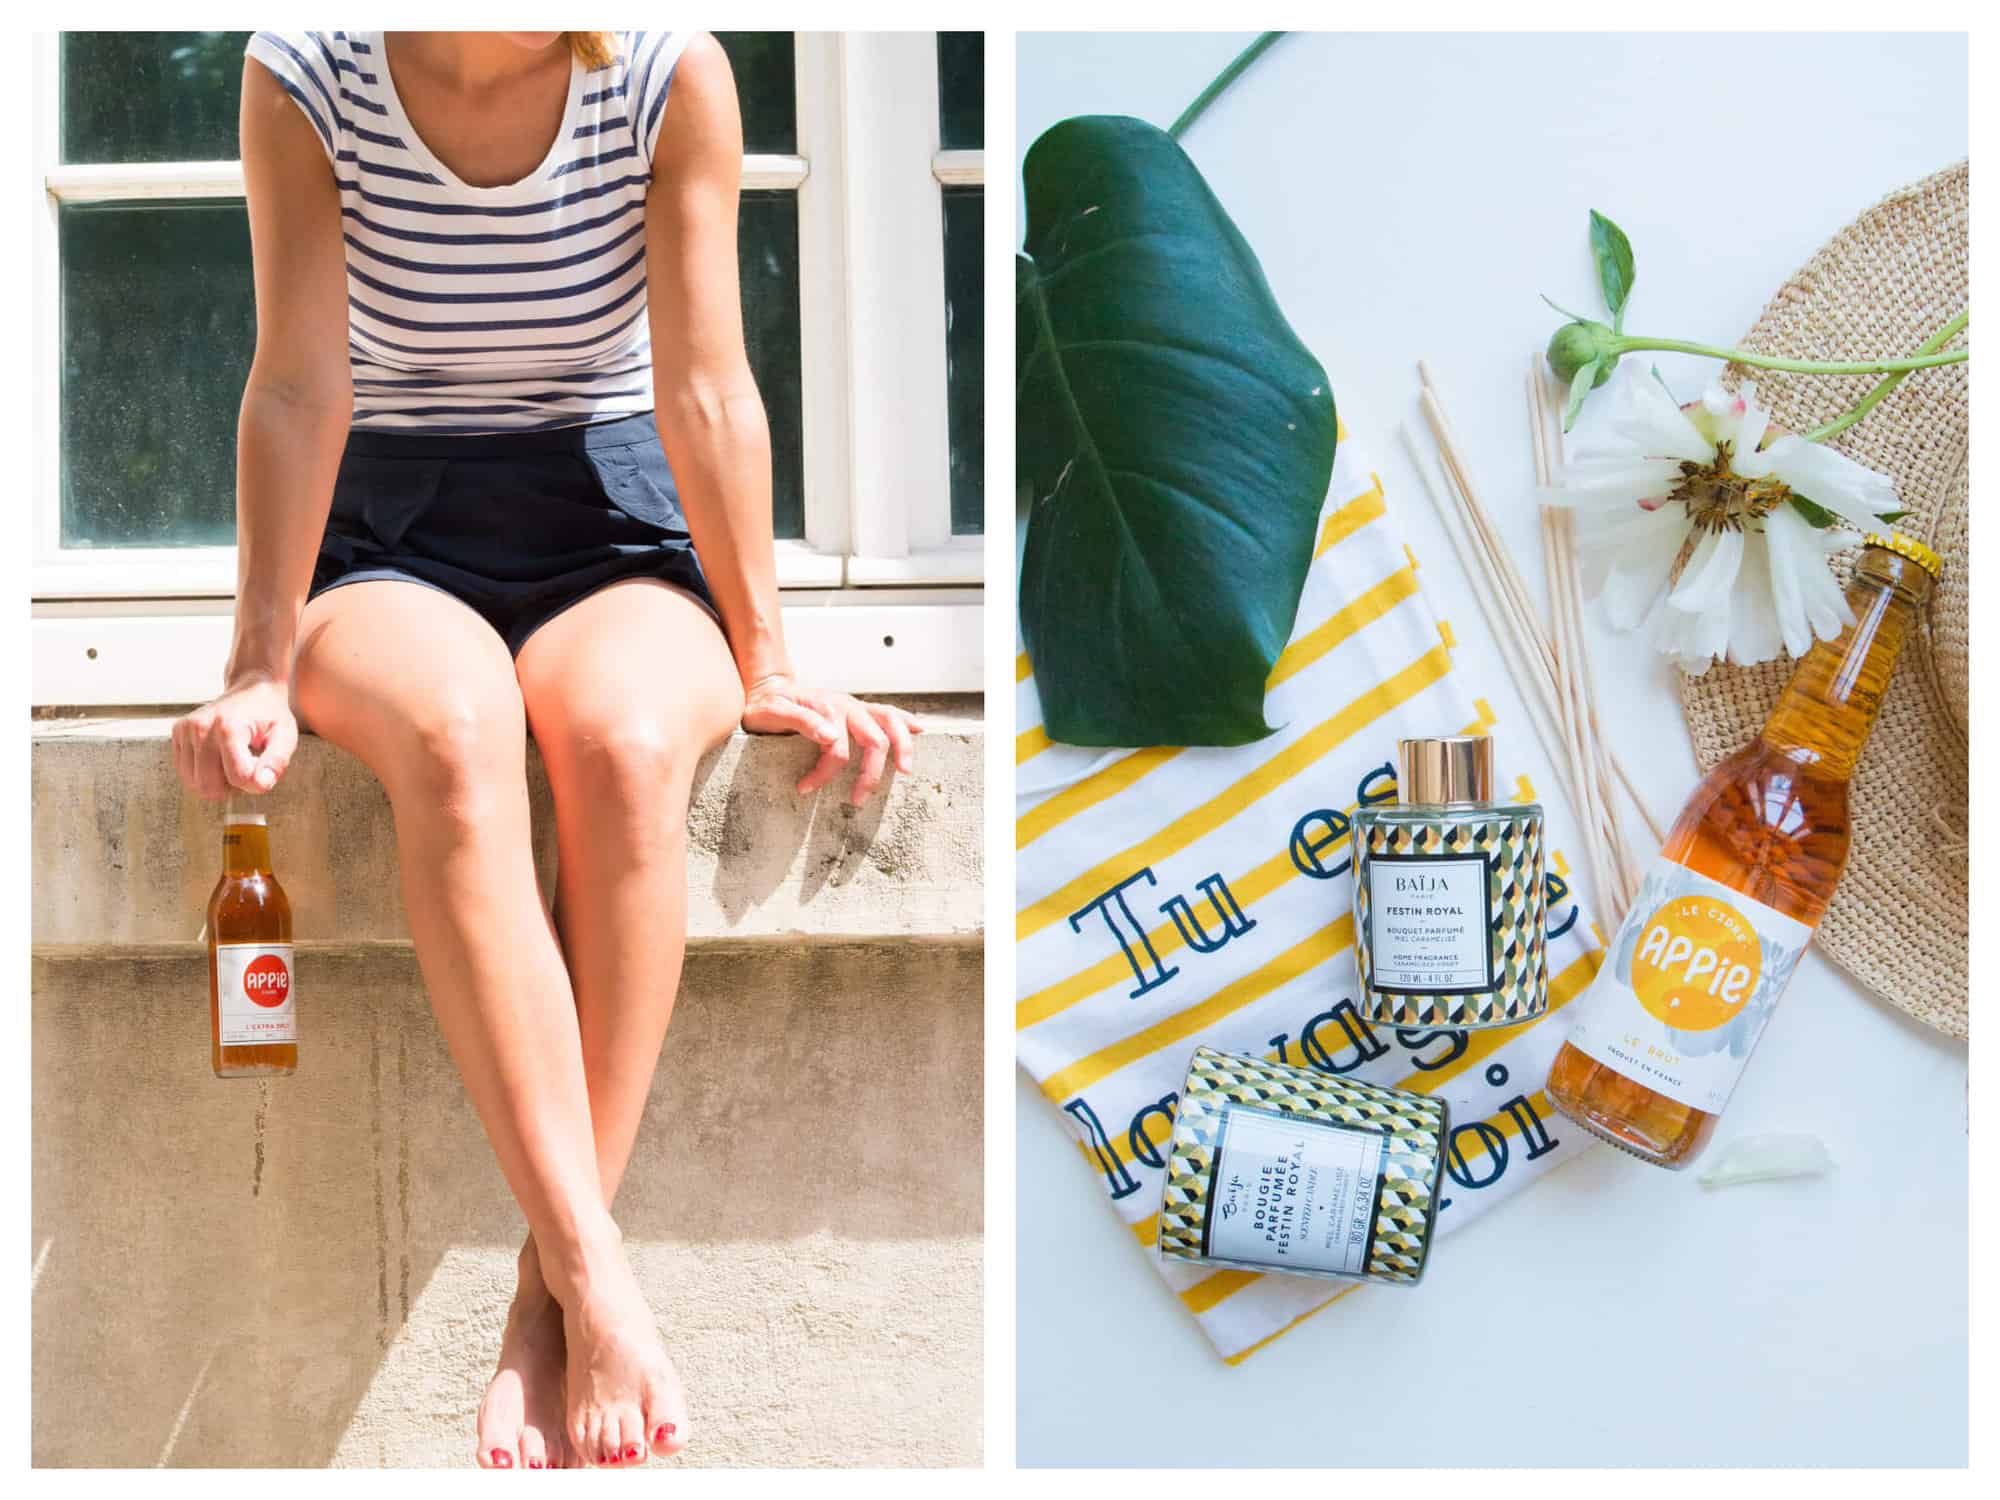 Left: a girl wearing a mariniere t-shirt and shorts sitting on a ledge holding an Apple cider.
Right: a flat lay with a French mariniere t-shirt, a candle, perfume, flowers, a straw hat and an Apple cider.